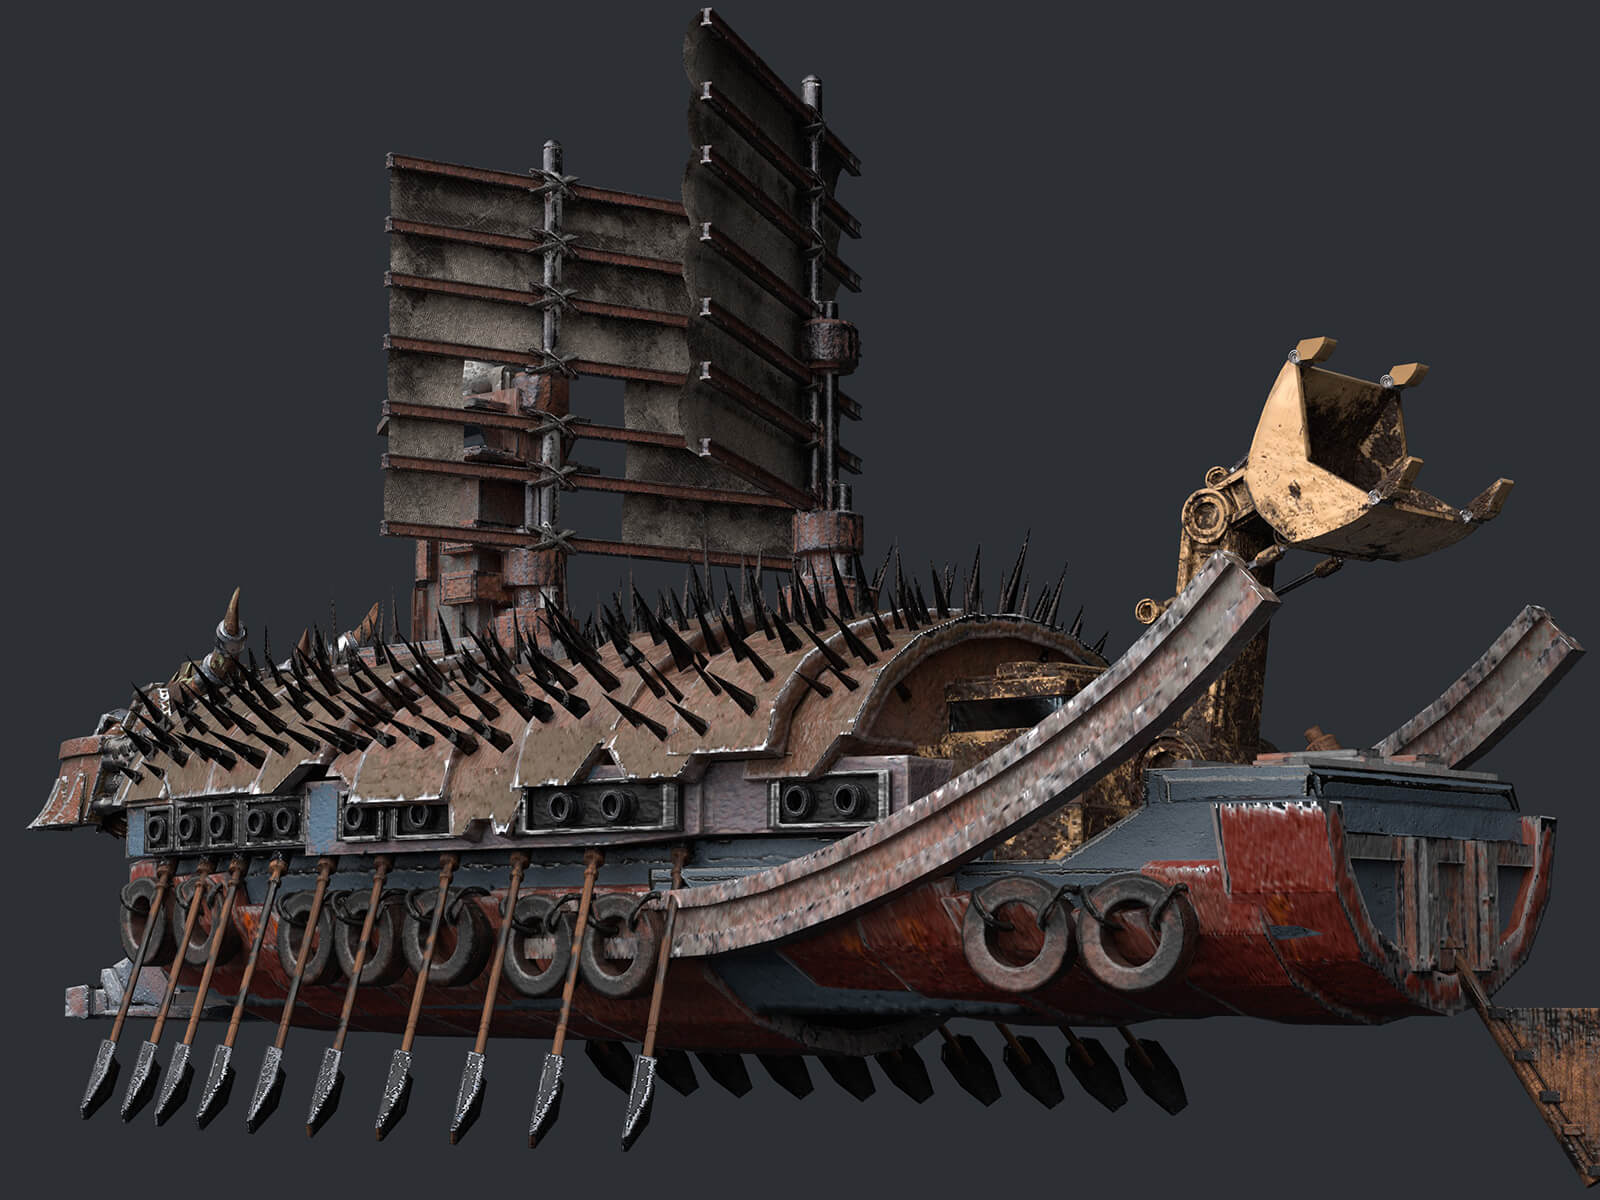 computer-generated 3D model of a ship with 20 oars and spikes on its roof